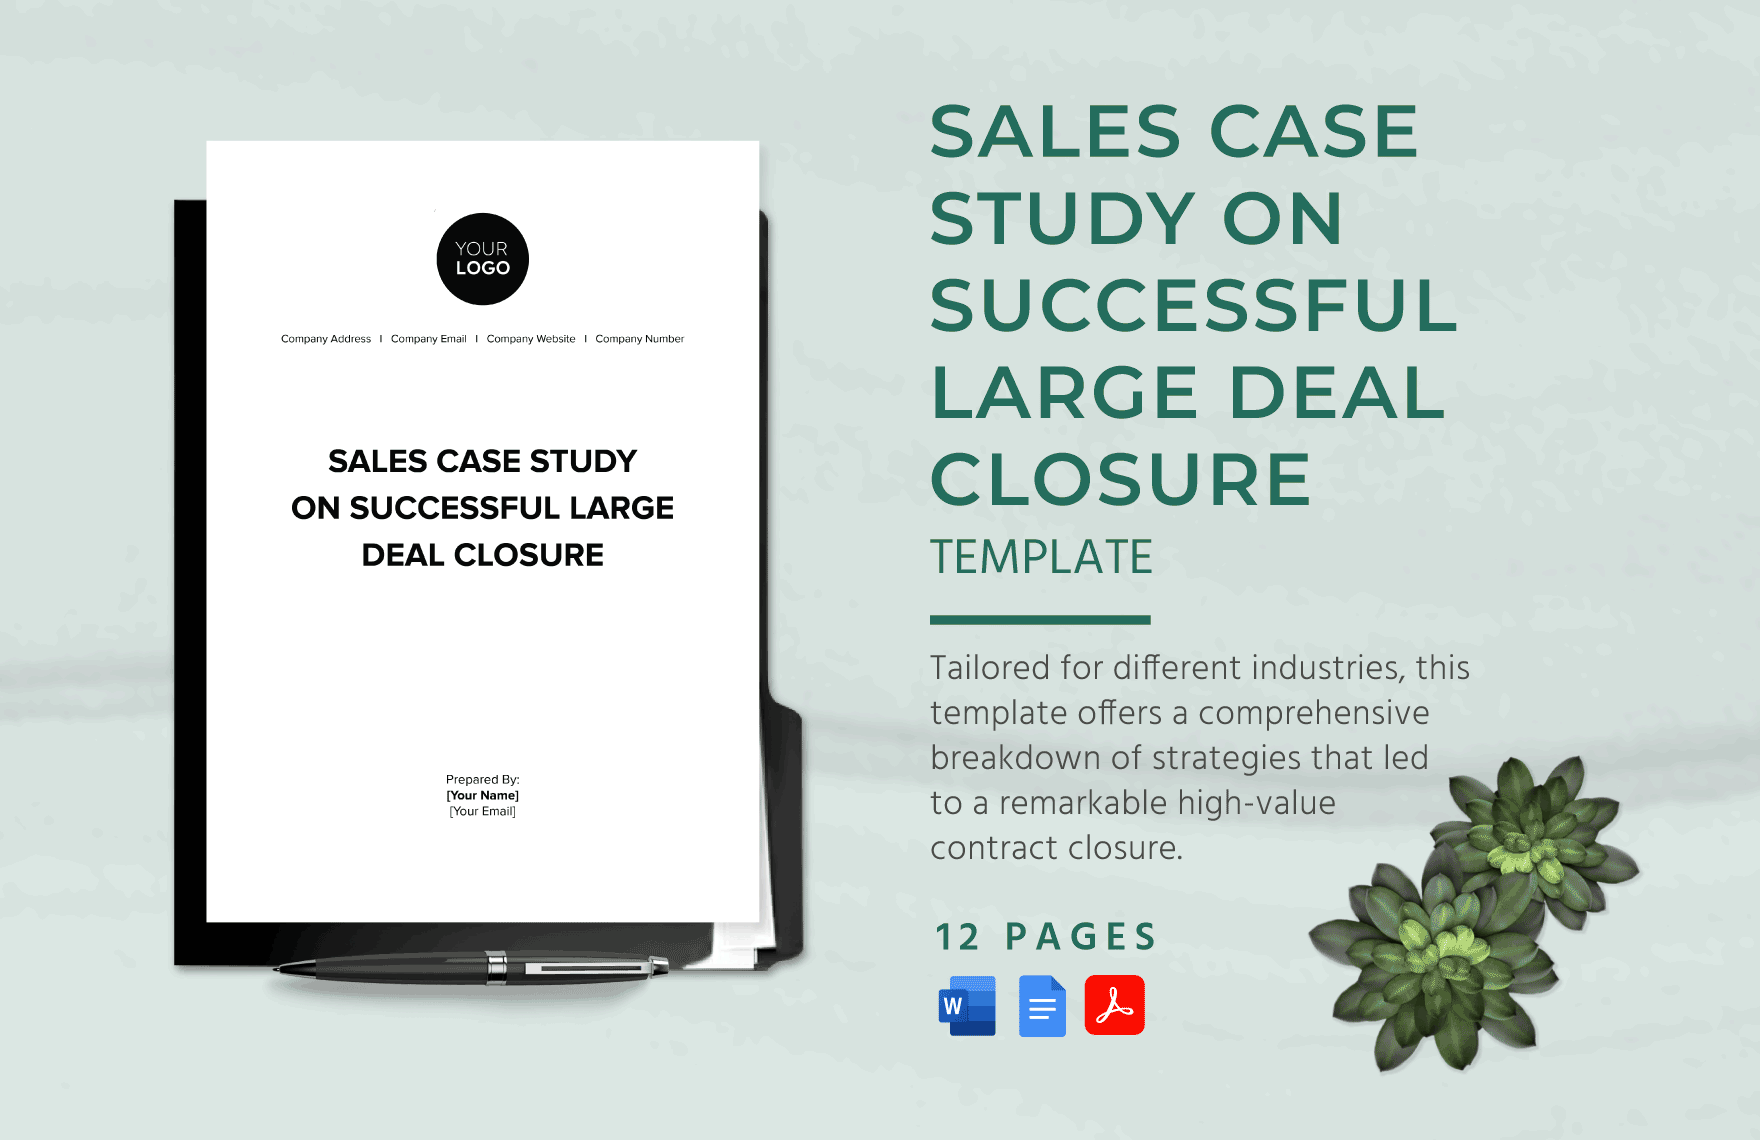 Sales Case Study on Successful Large Deal Closure Template